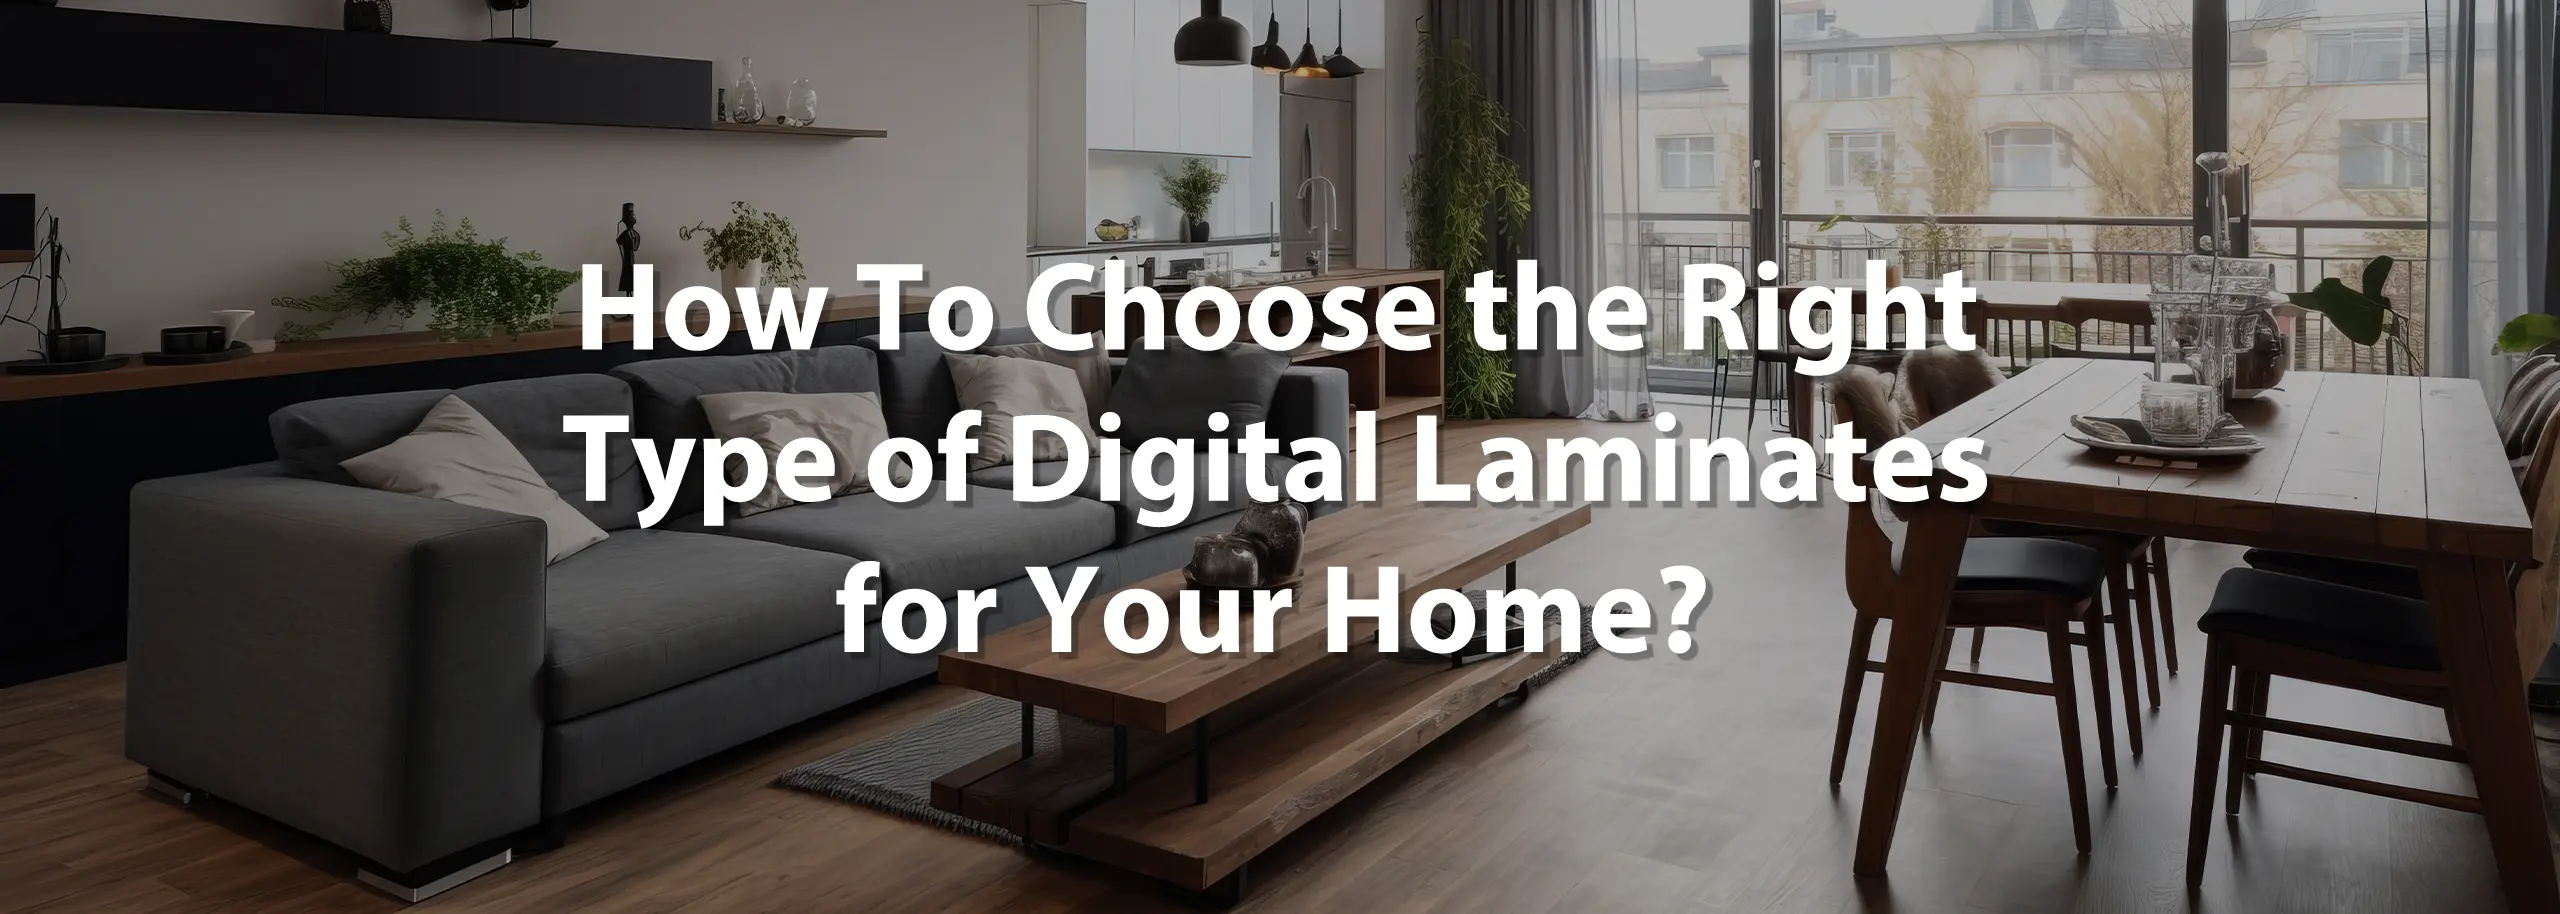 how to choose the right type of digital laminates for your home